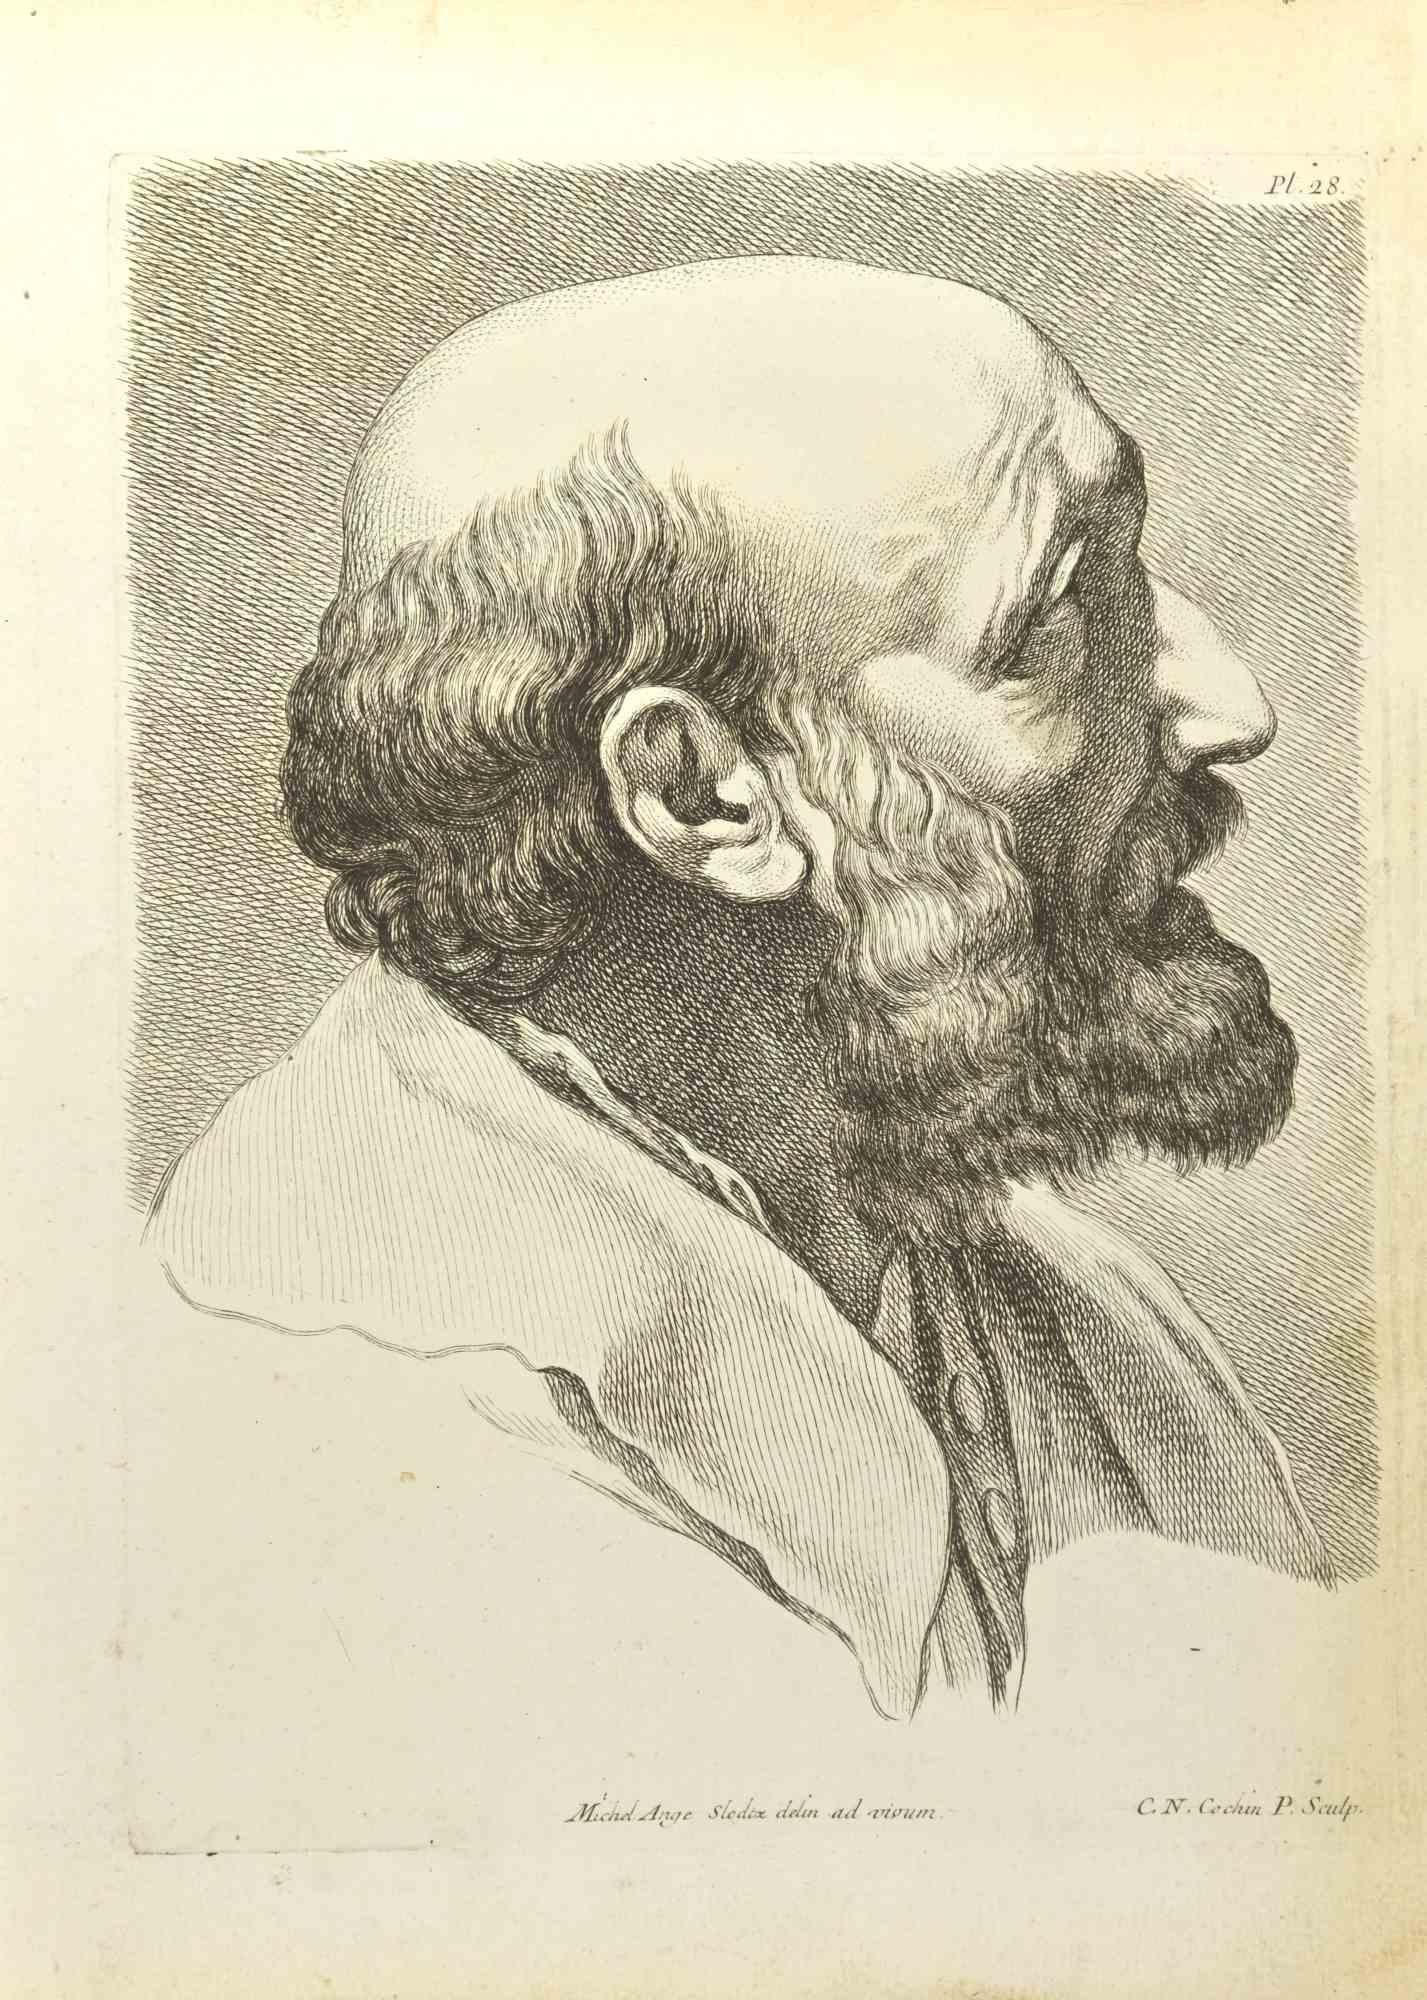 Portrait after Michelangelo is an etching realized by Nicholas Cochin in 1755.

Good conditions.

Signed in plate.

The artwork is depicted through confident strokes.

The etching was realized for the anatomy study “JOMBERT, Charles-Antoine